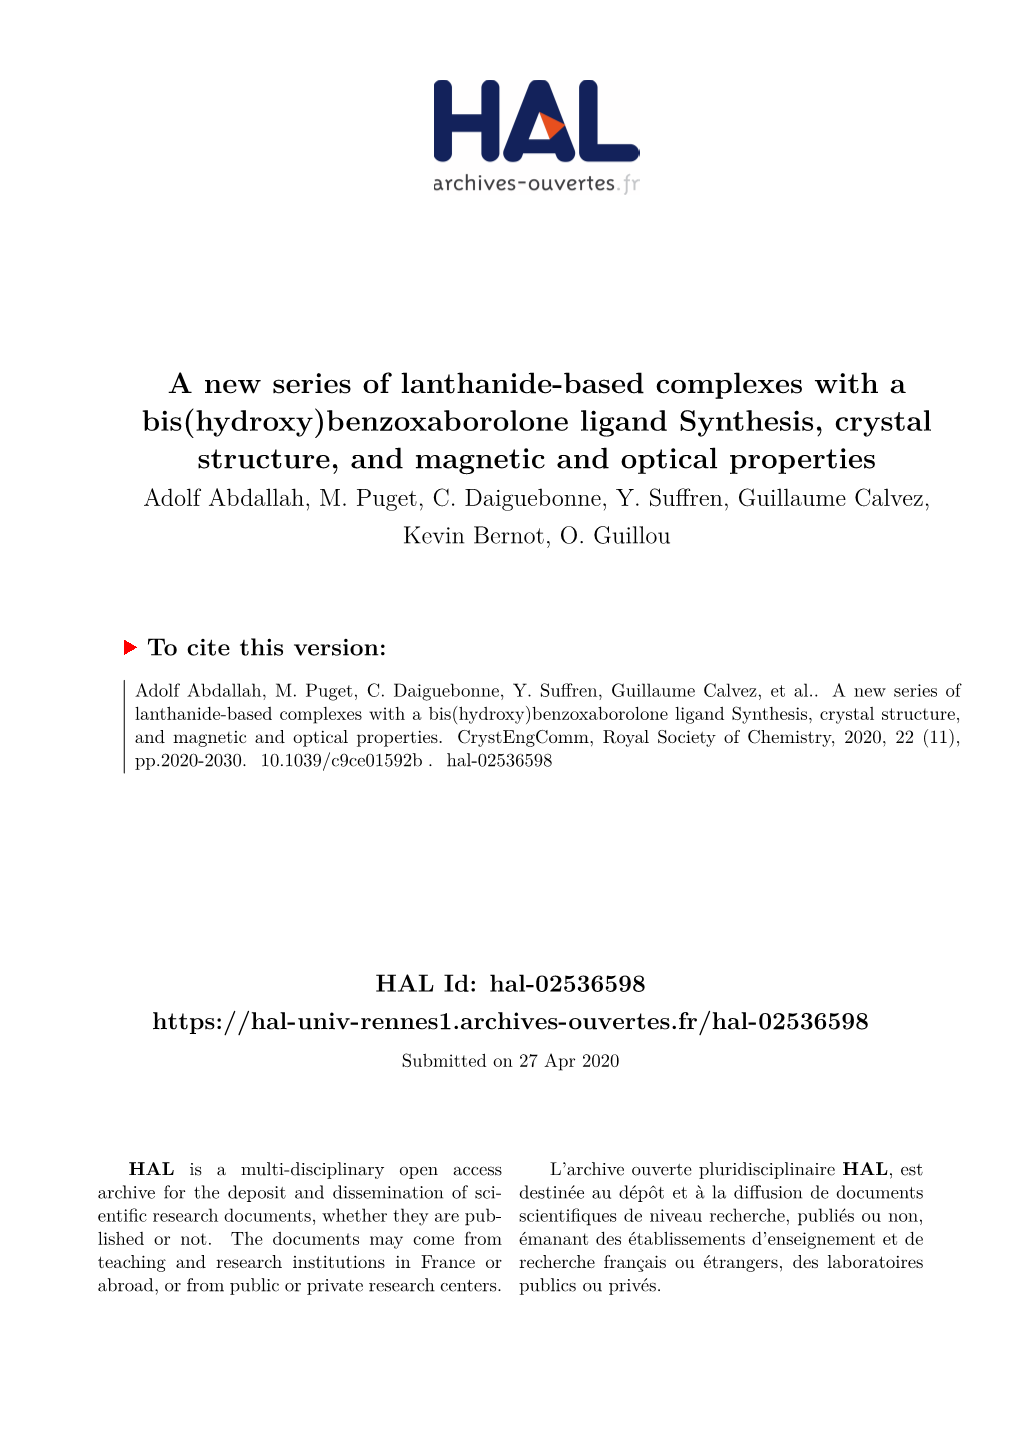 A New Series of Lanthanide-Based Complexes with A